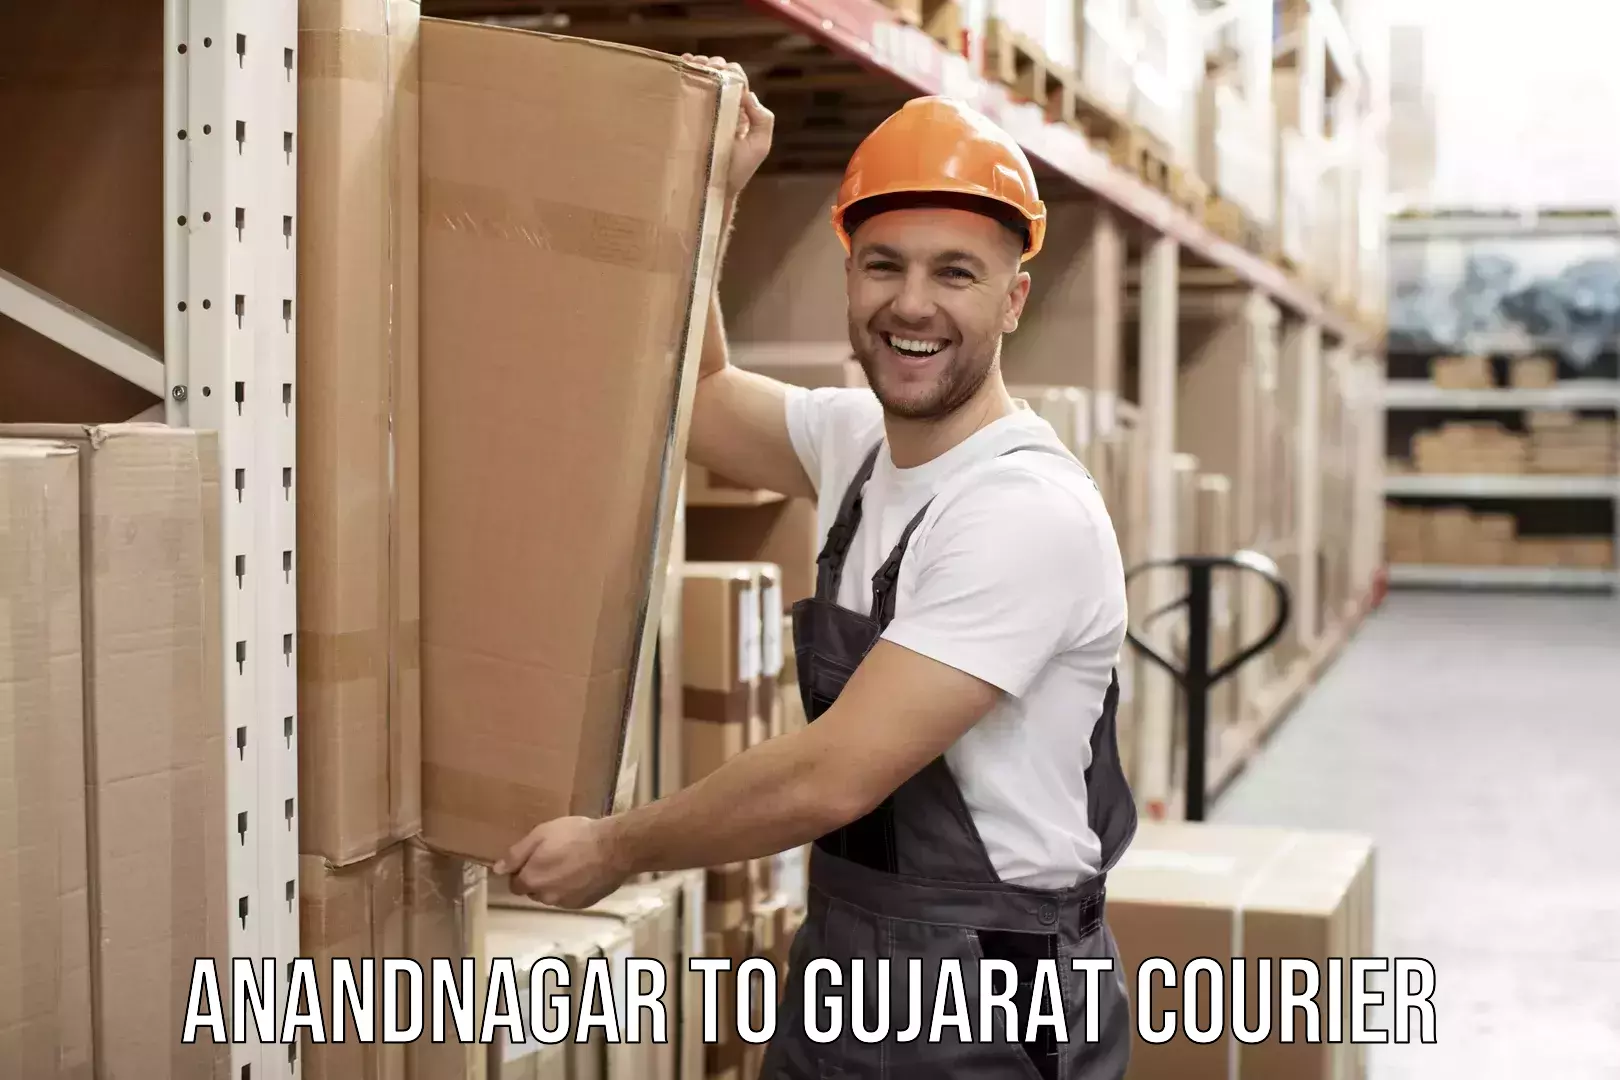 Home relocation experts Anandnagar to Tarapur